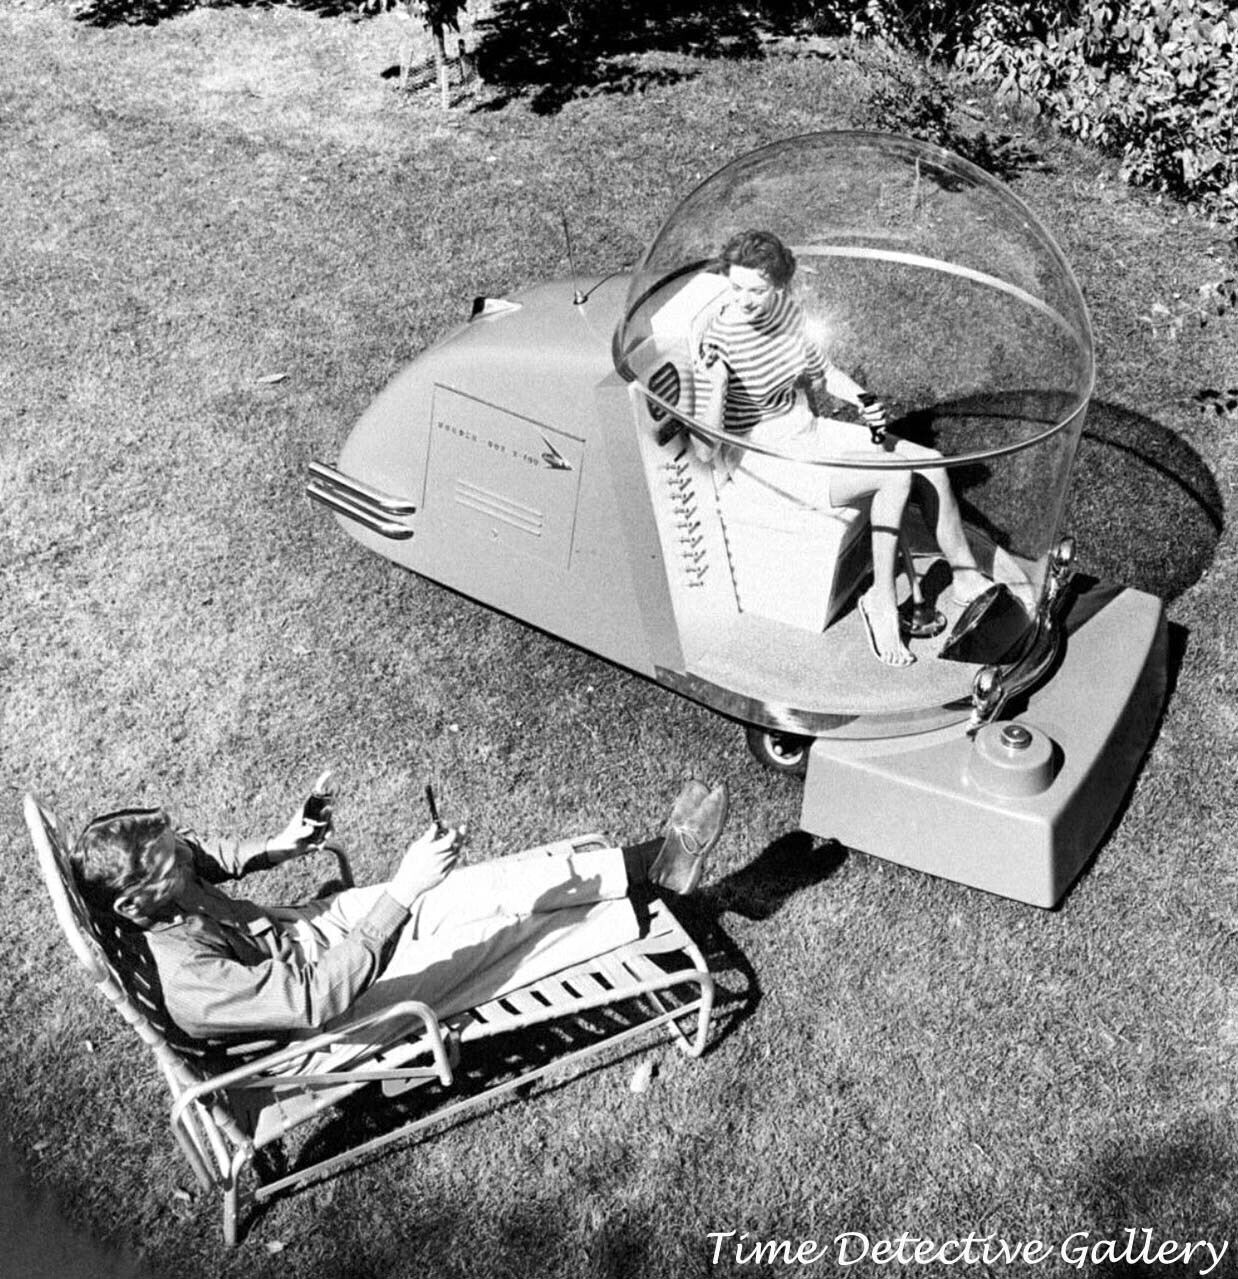 Luxury Air Conditioned Lawnmower of the Future - 1957 - Vintage Photo Print